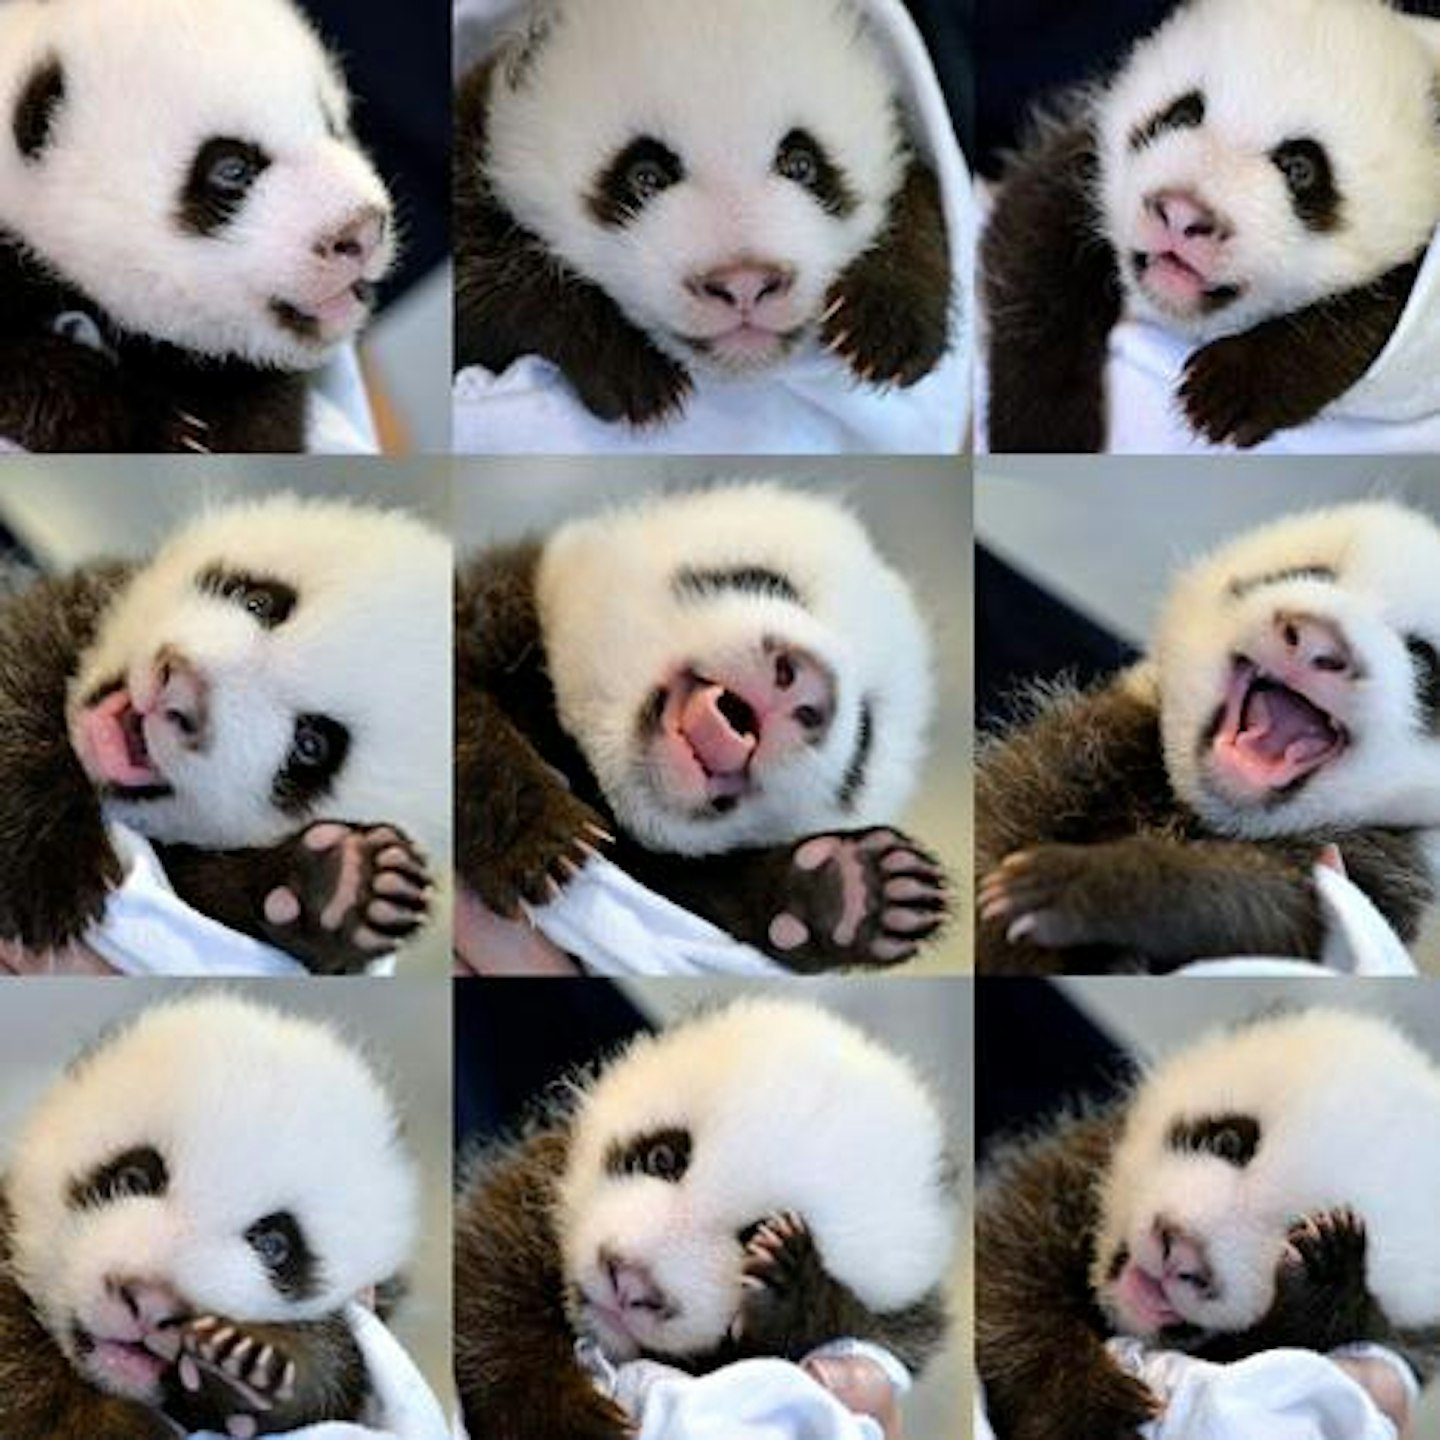 Giant panda 'Lun Lun' gave birth to twins on July 15 an both of the male cubs are doing well.